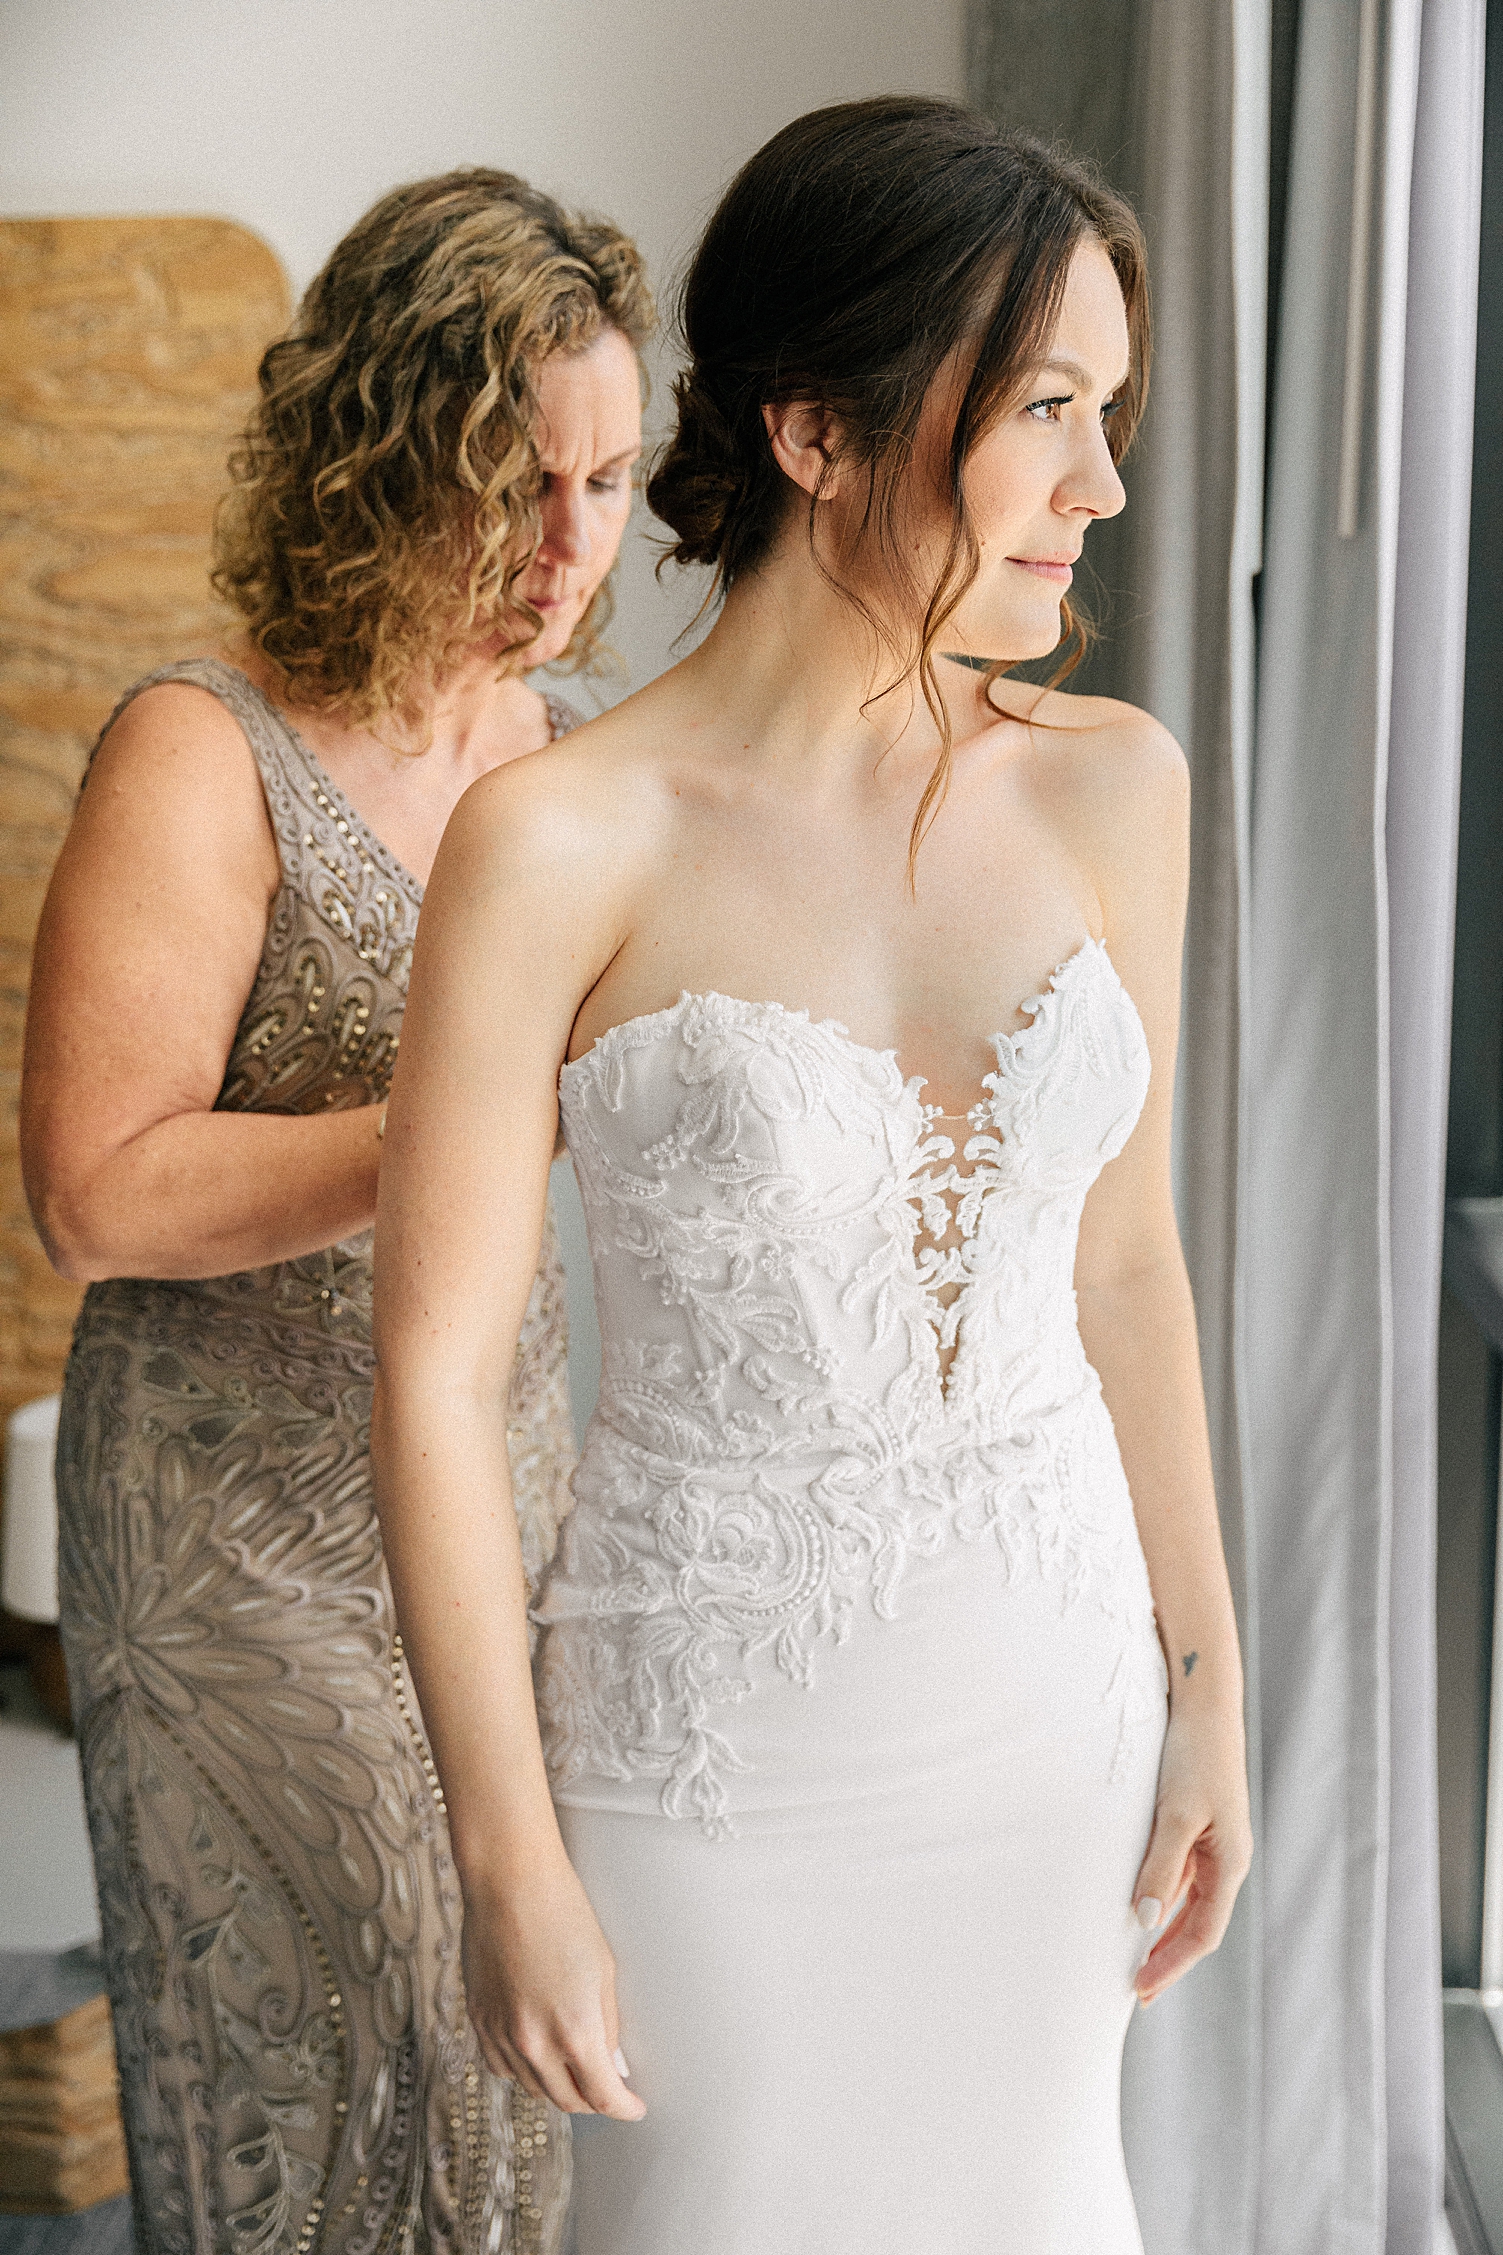 mother helping bride into wedding dress